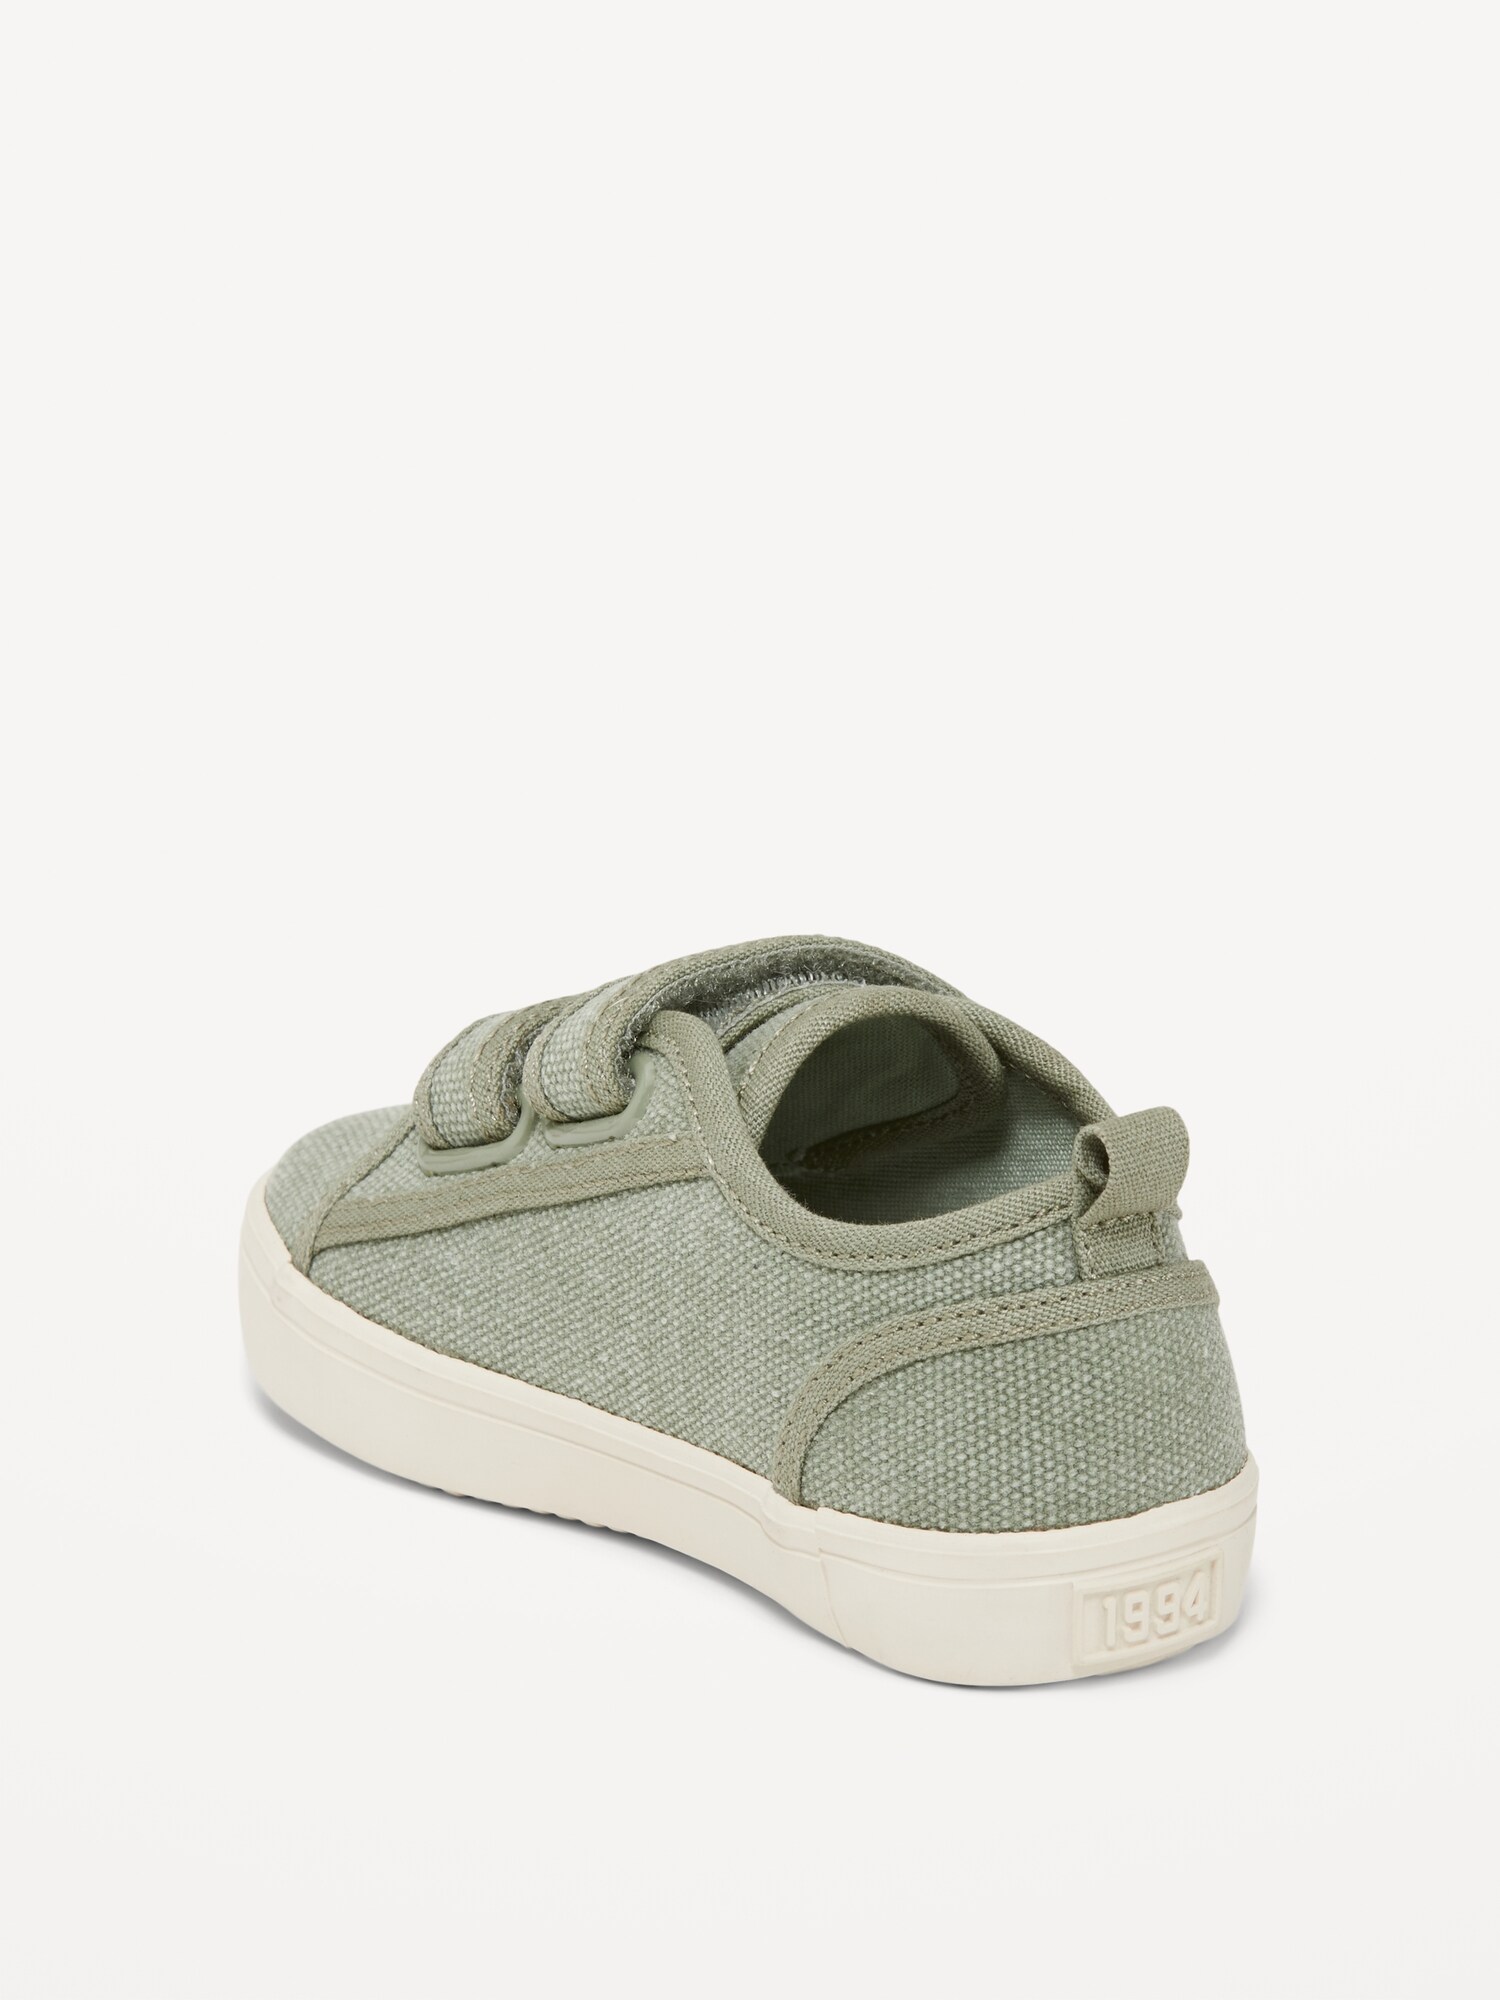 Canvas Double-Strap Sneakers for Toddler Boys | Old Navy